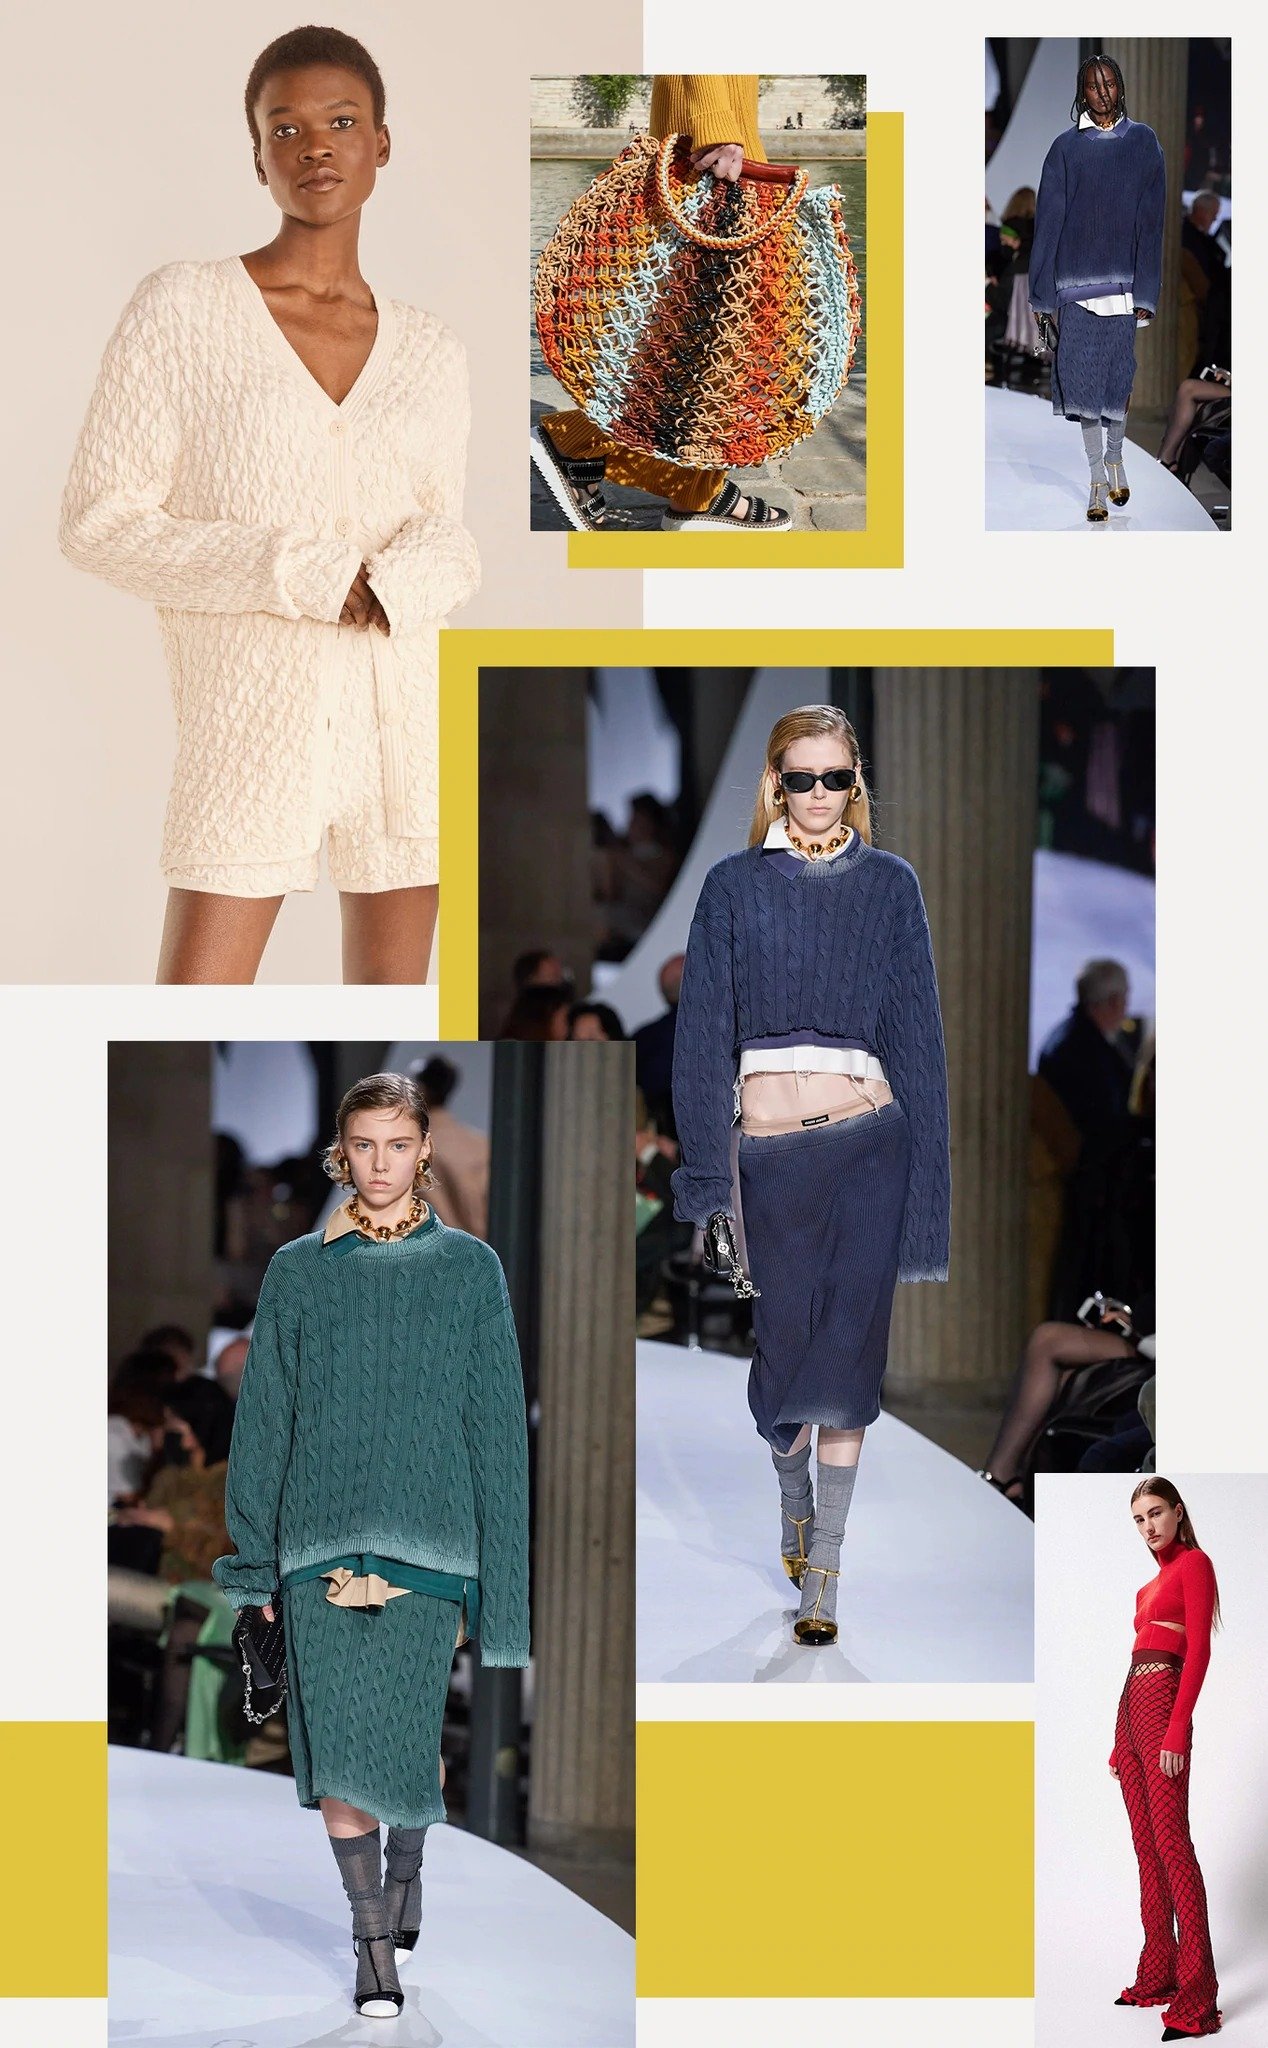 Miuccia Prada’s fun iterations of cotton cable knit sweaters and skirts on the Miu Miu runway